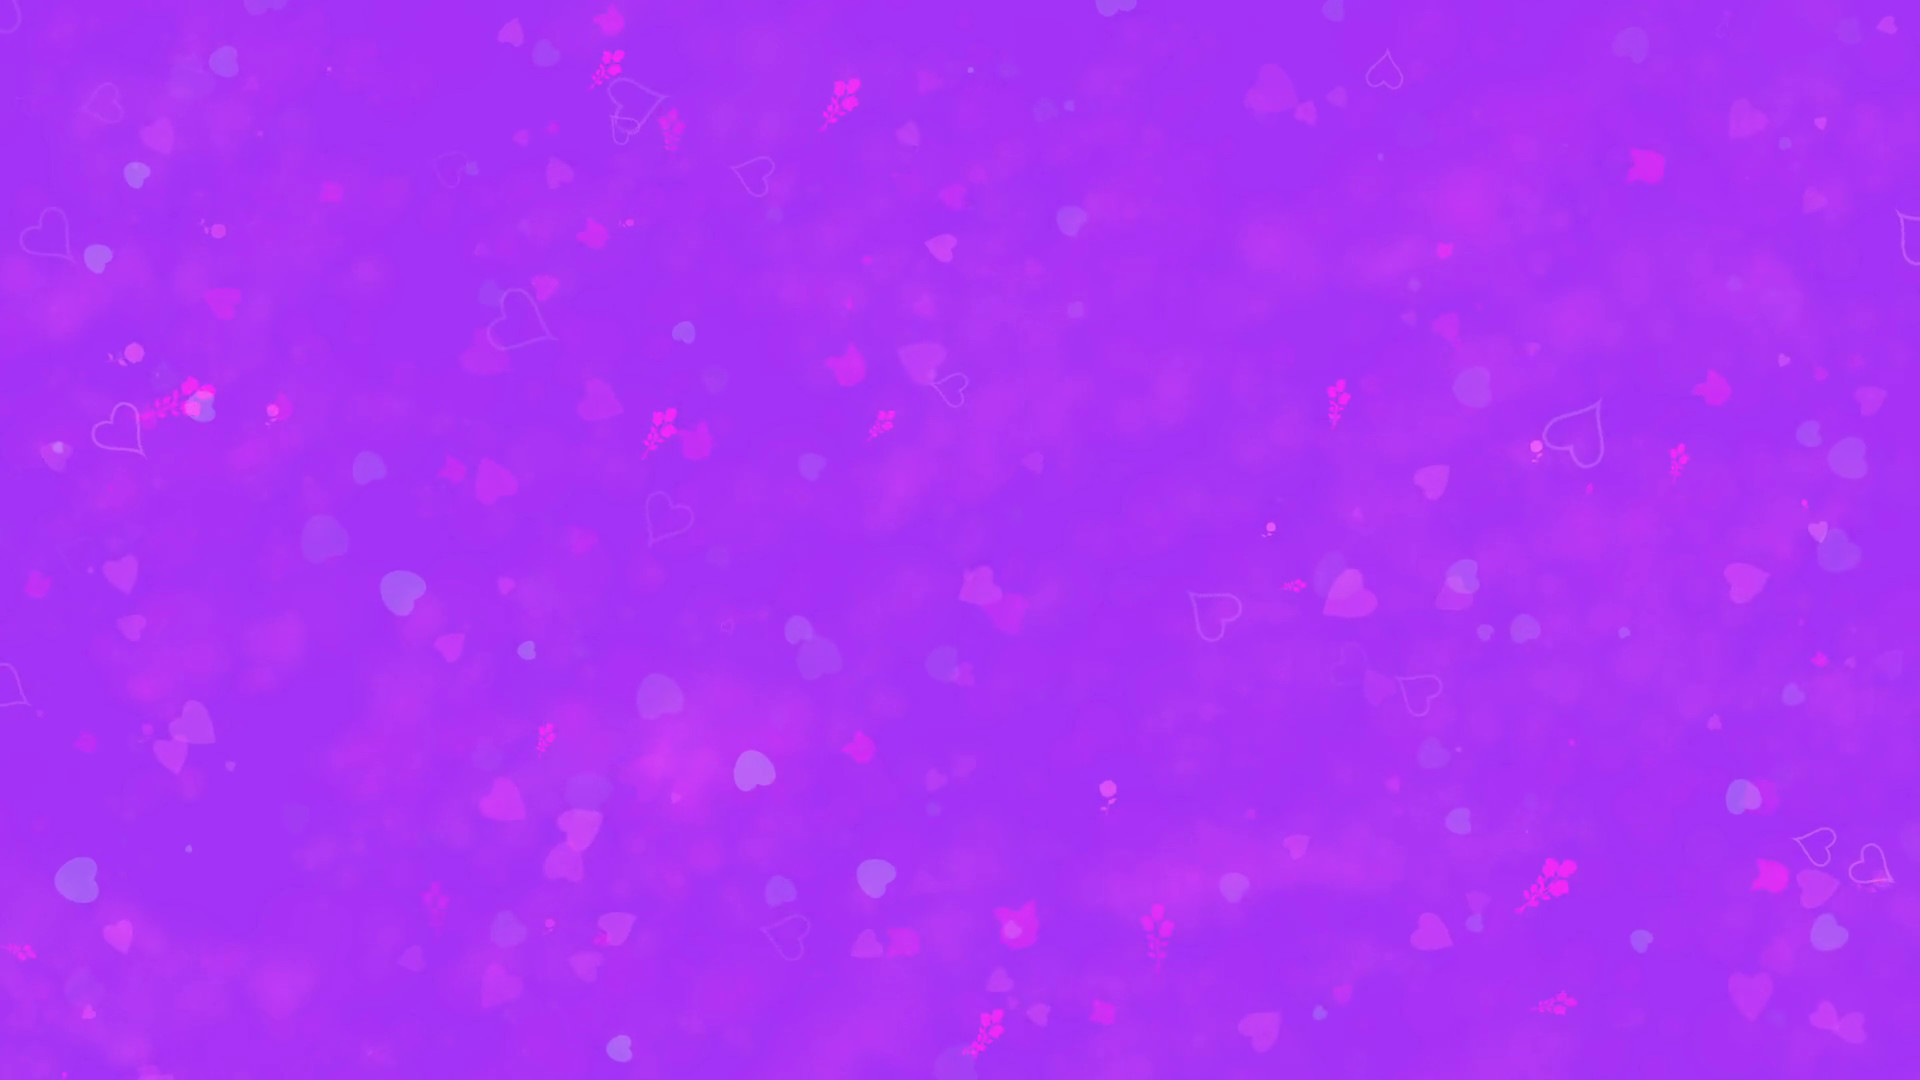 1920x1080 Love themed purple animated background with moving hearts and roses for  Valentine's Day